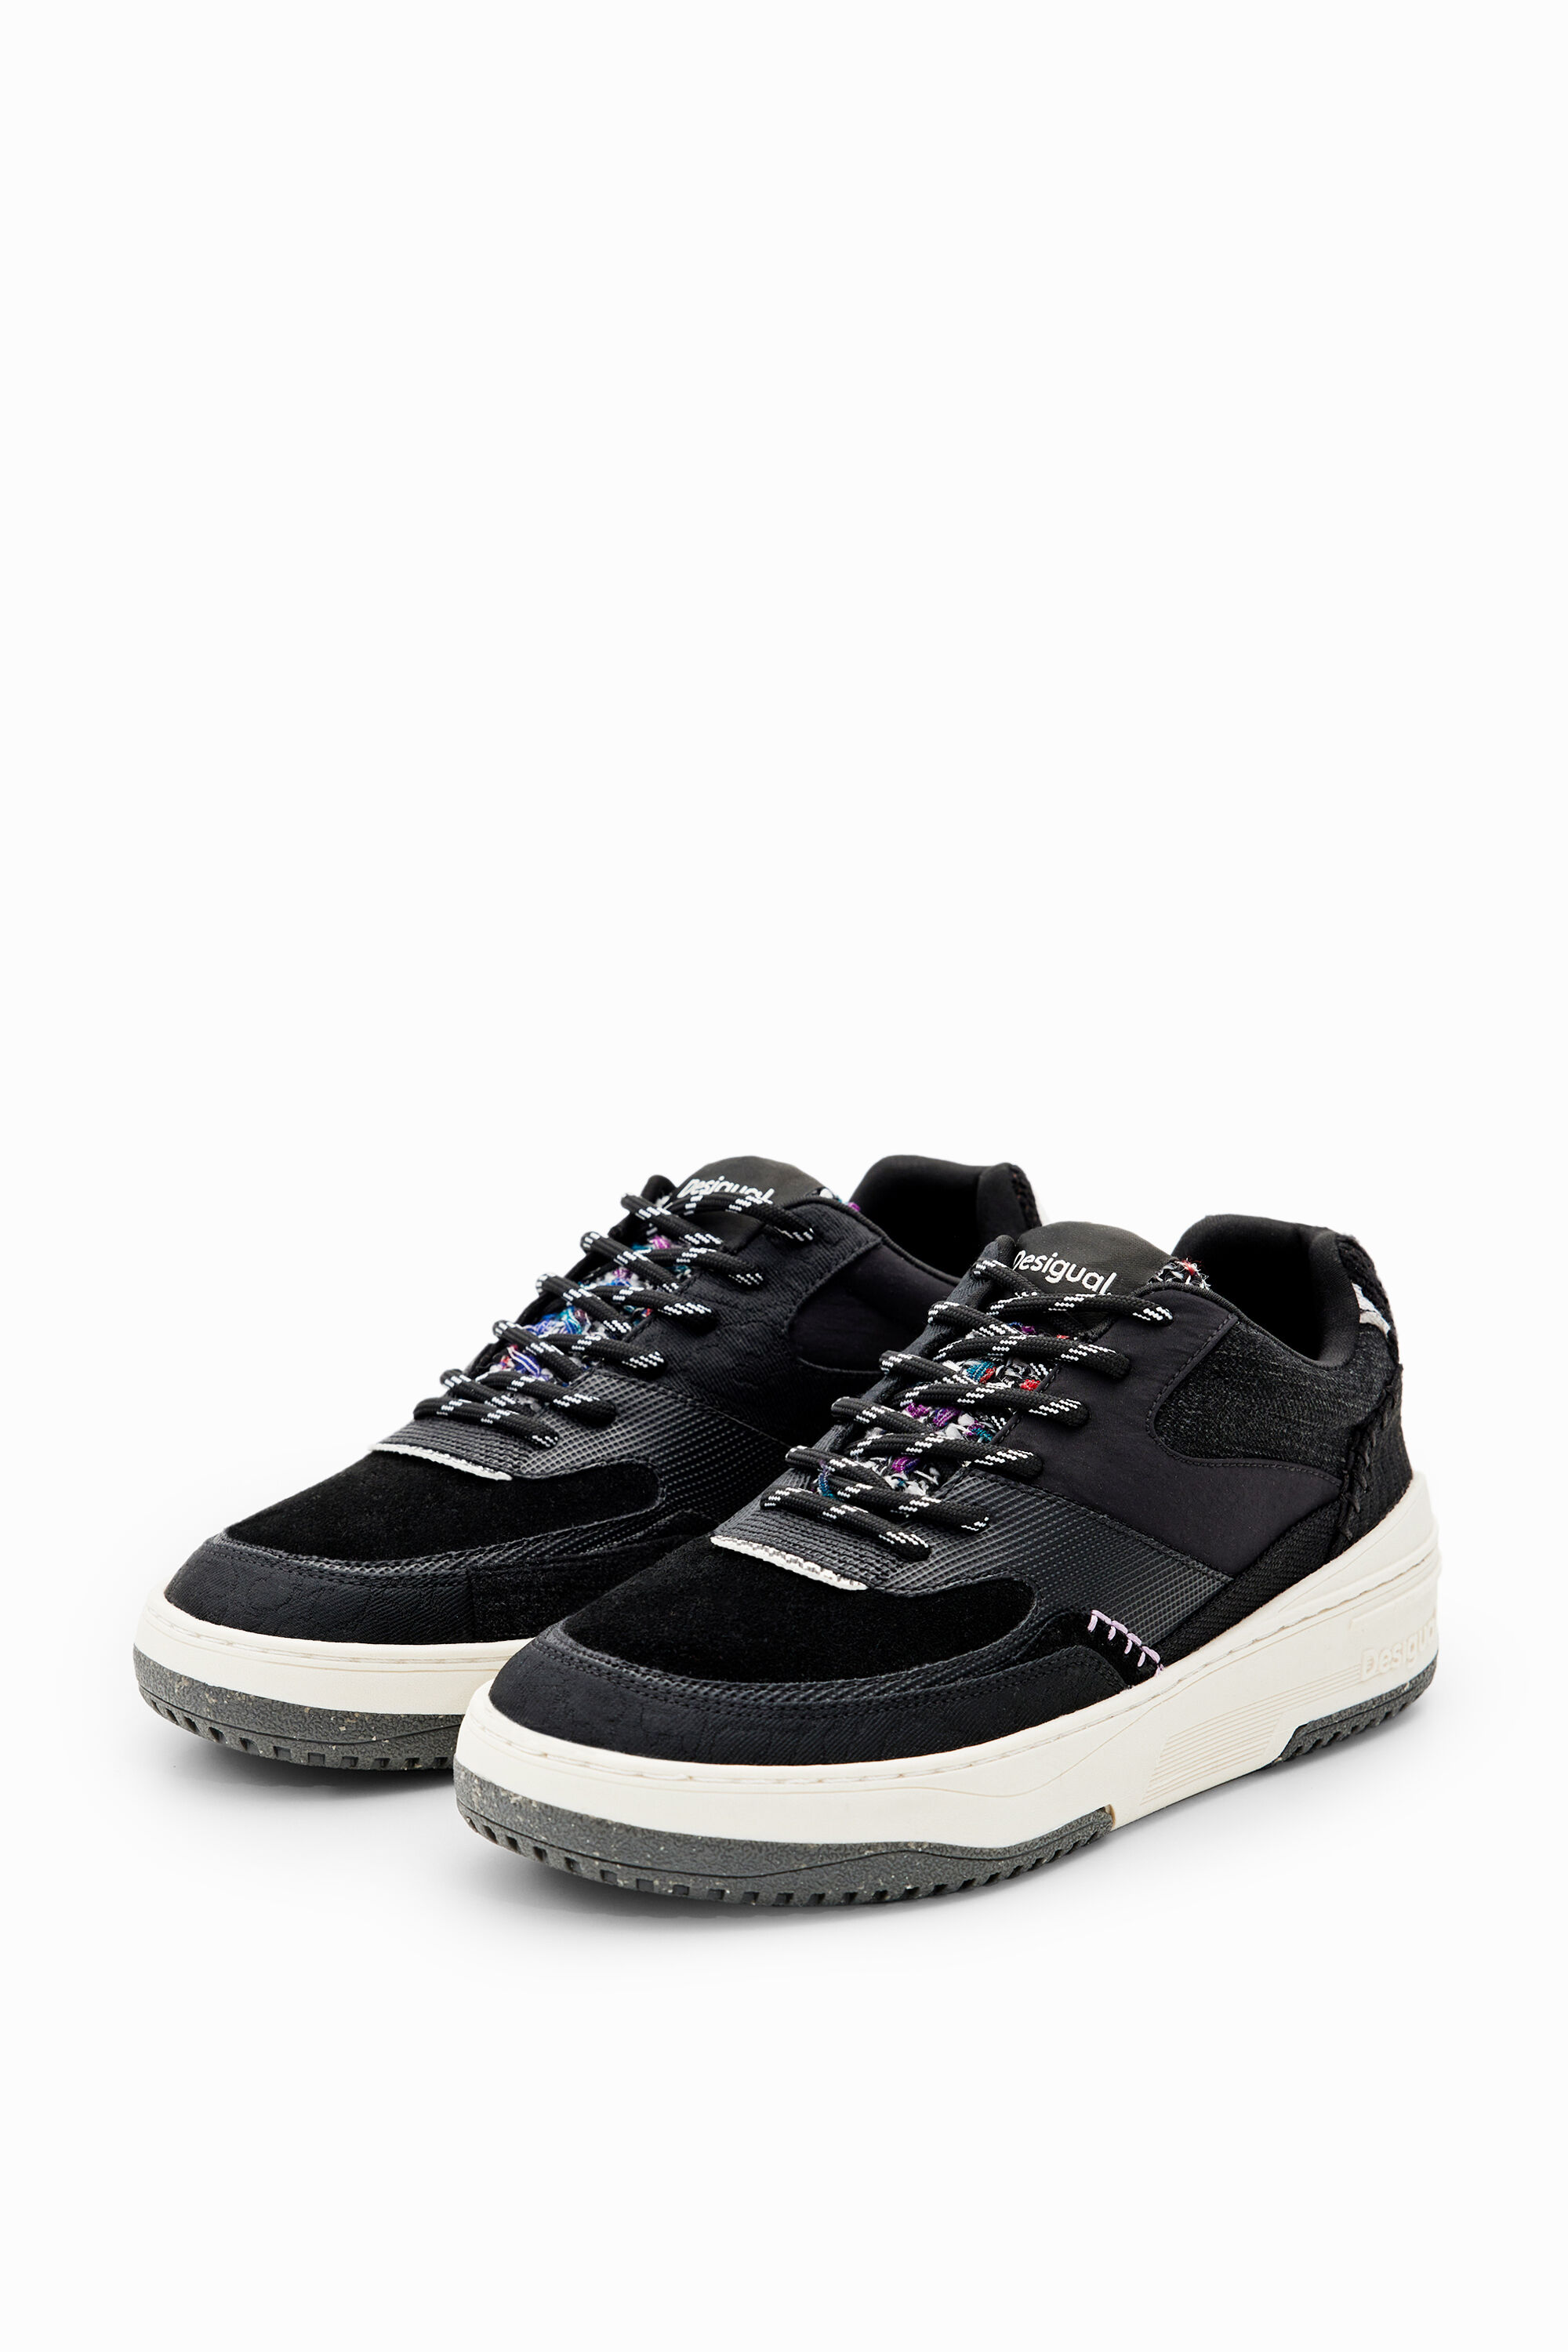 Retro chunky patchwork sneakers - BLACK - 38